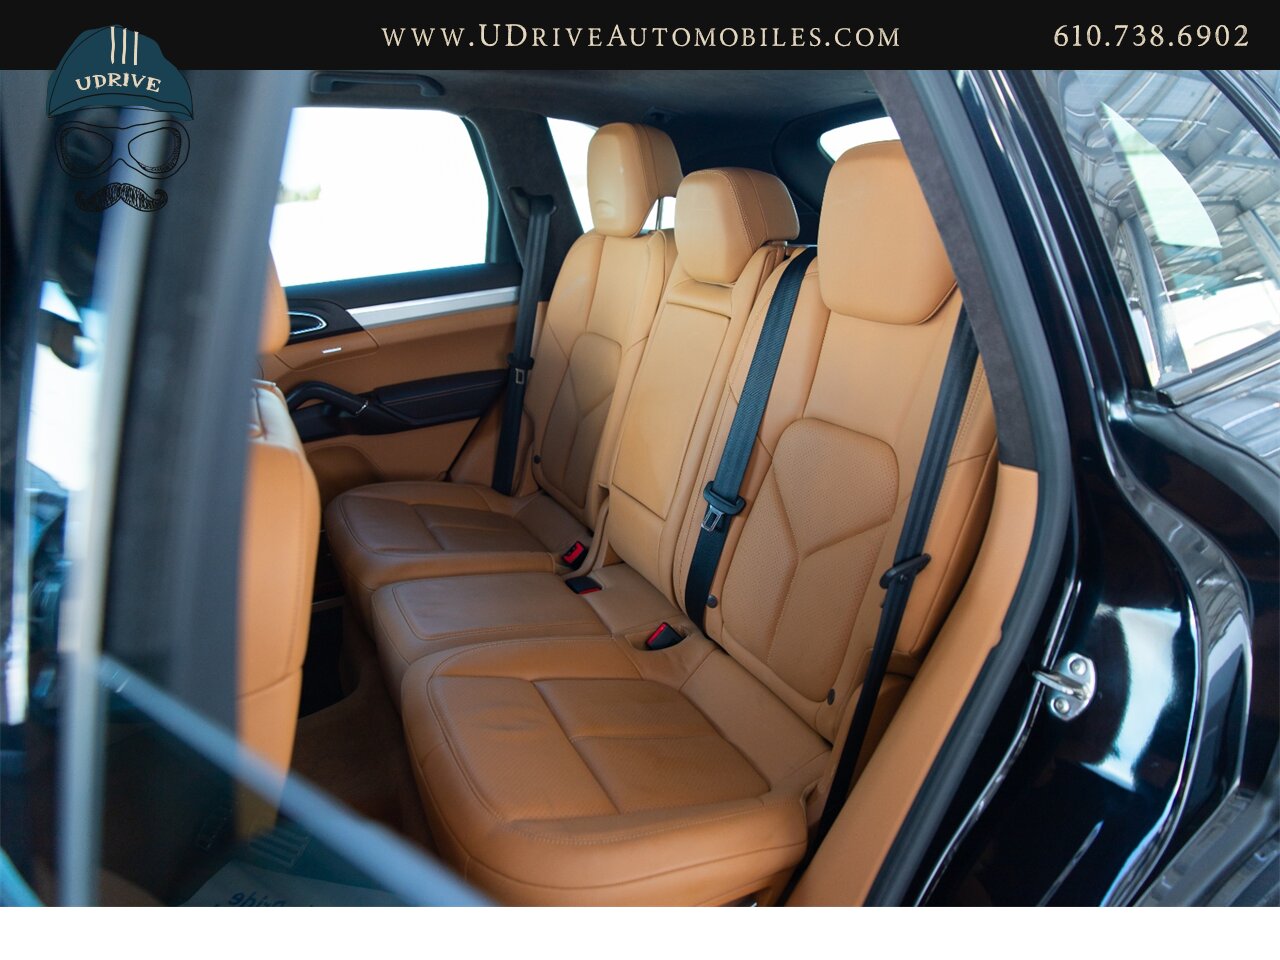 2013 Porsche Cayenne GTS Service History 1 Owner 21in Wheels  Espresso / Cognac Two Tone Leather - Photo 43 - West Chester, PA 19382